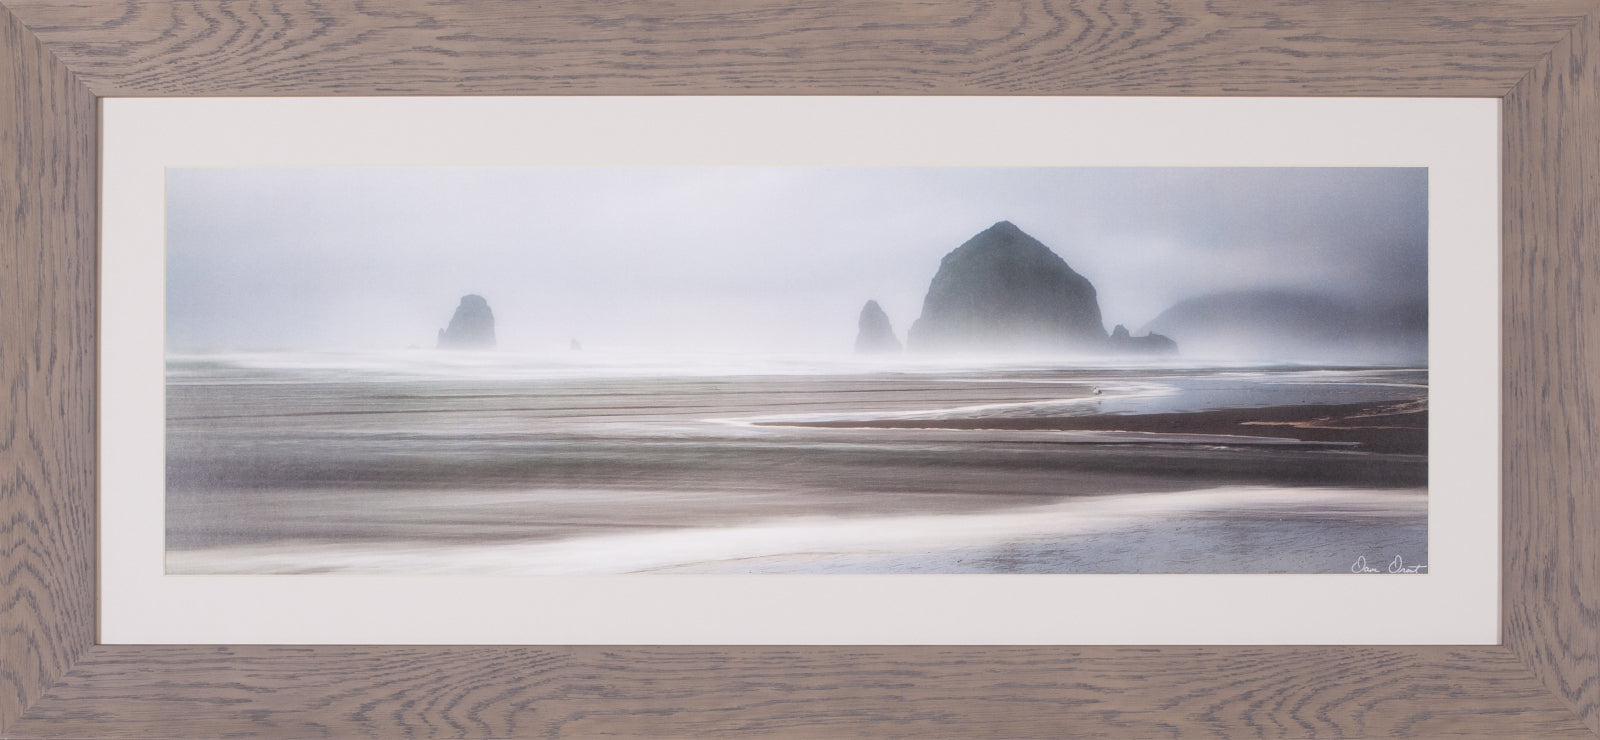 Art Effects From Cannon Beach I Wall Art by David Drost